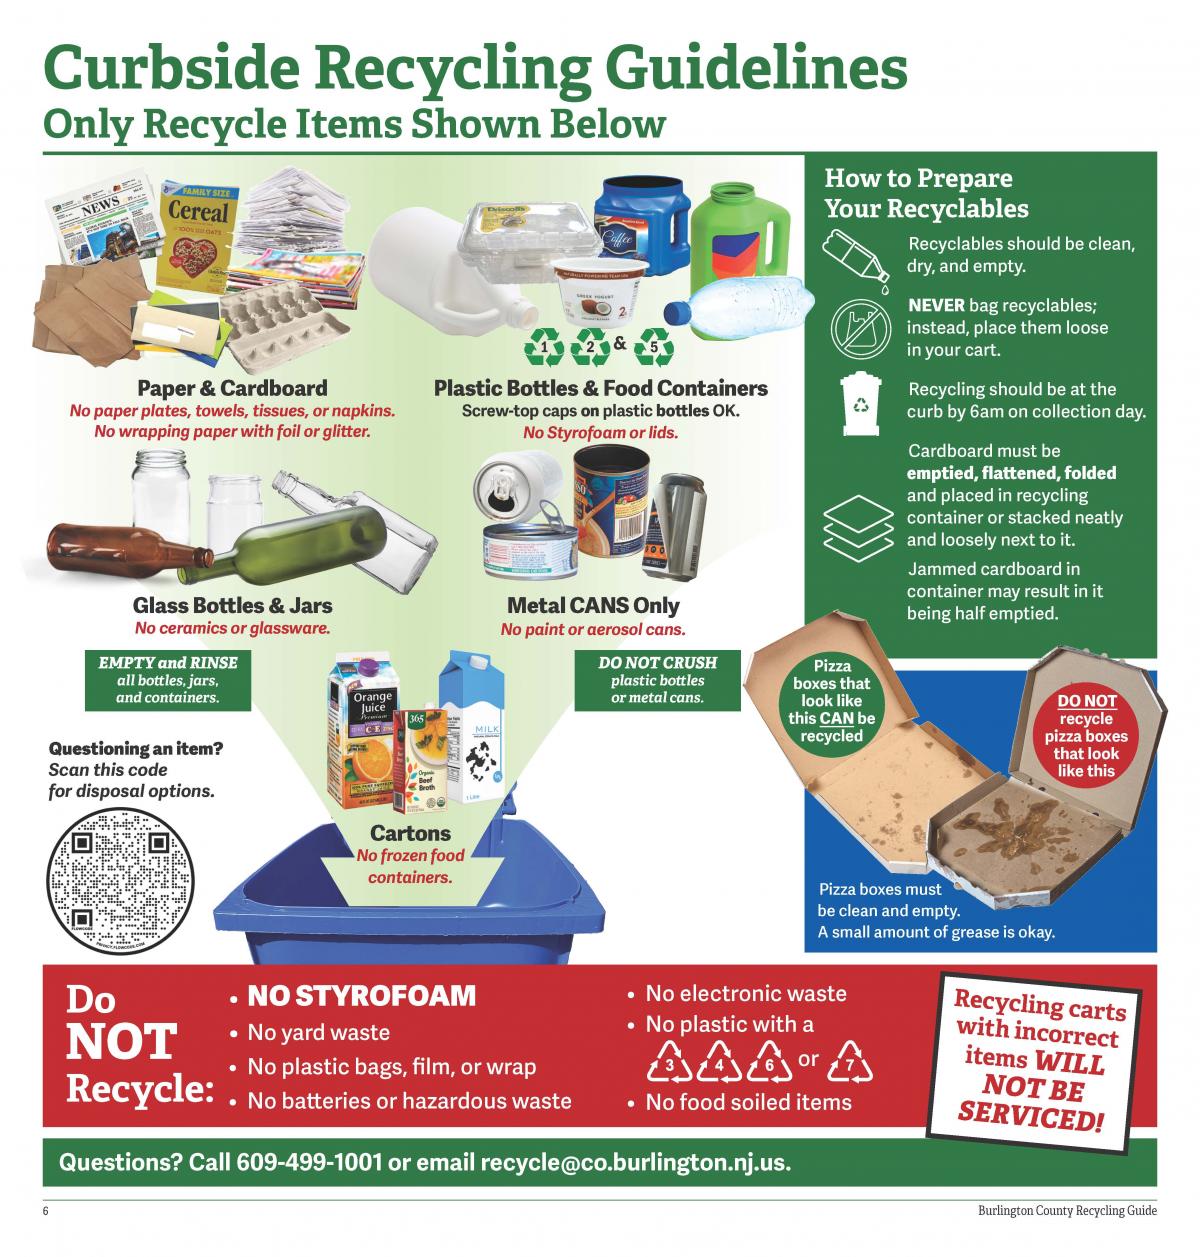 Recycling Guide with Images of Cardboard, Plastic, Bottles, Cans